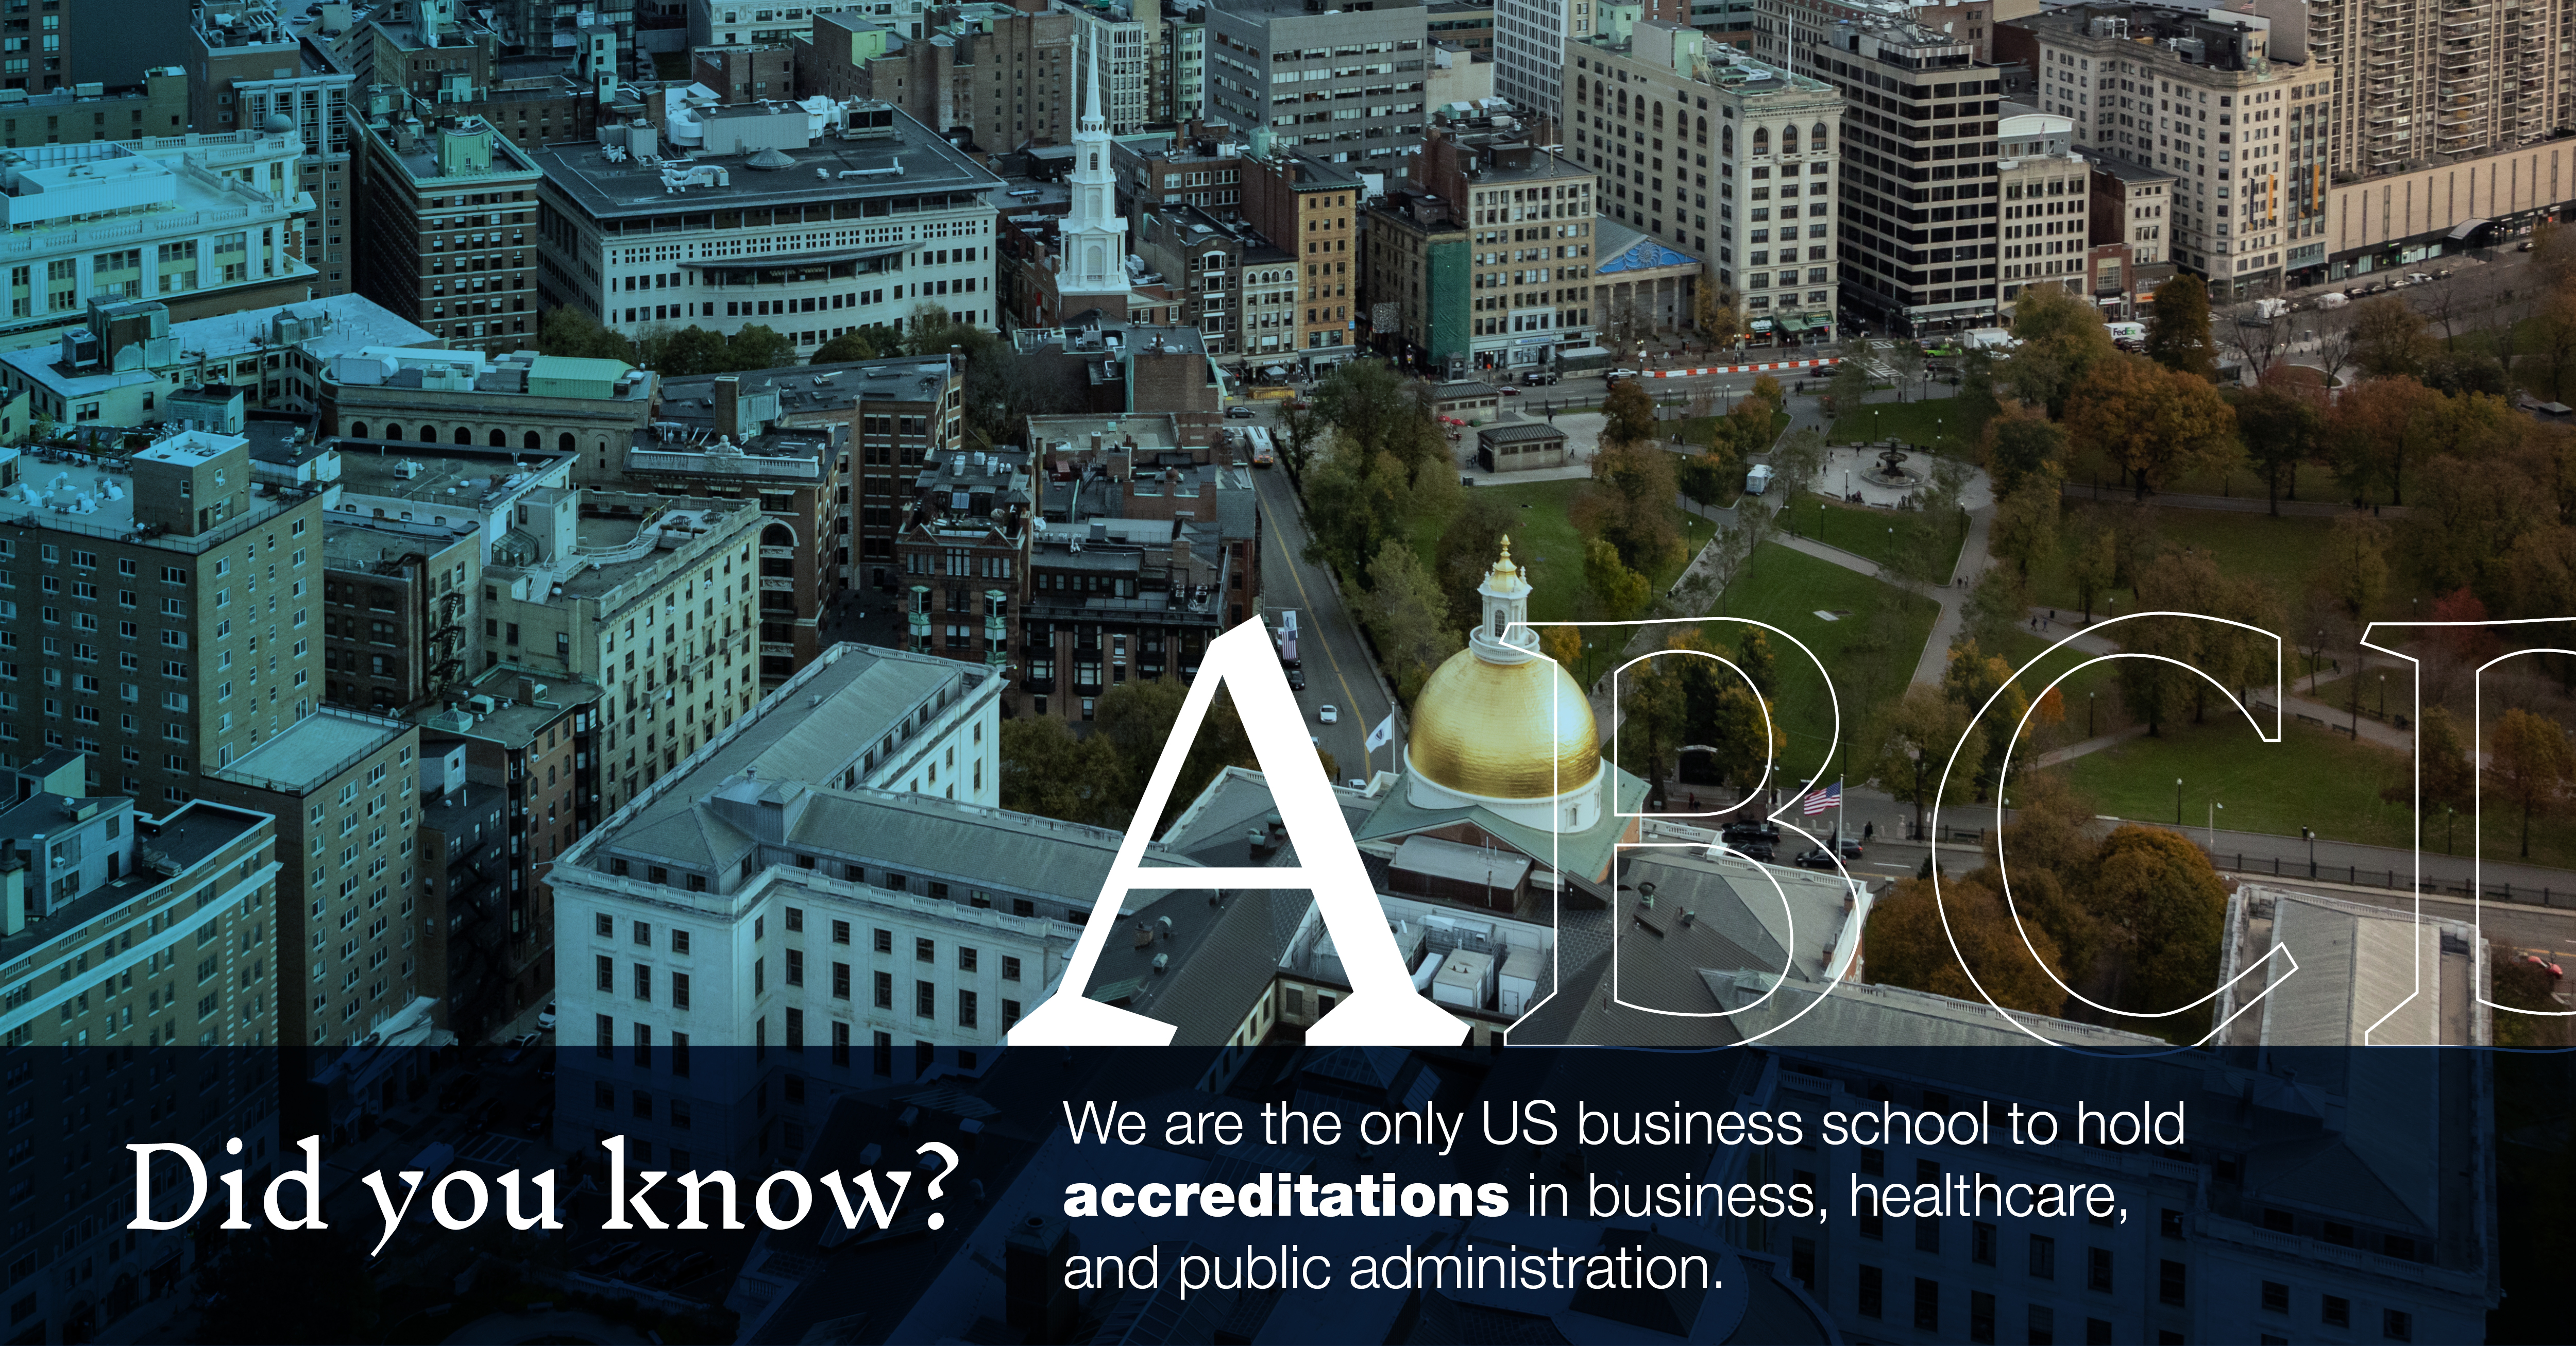 Aerial view of the Mass State House: "Did you we're the only US business school to hold accreditation in business, healthcare, and public administration?